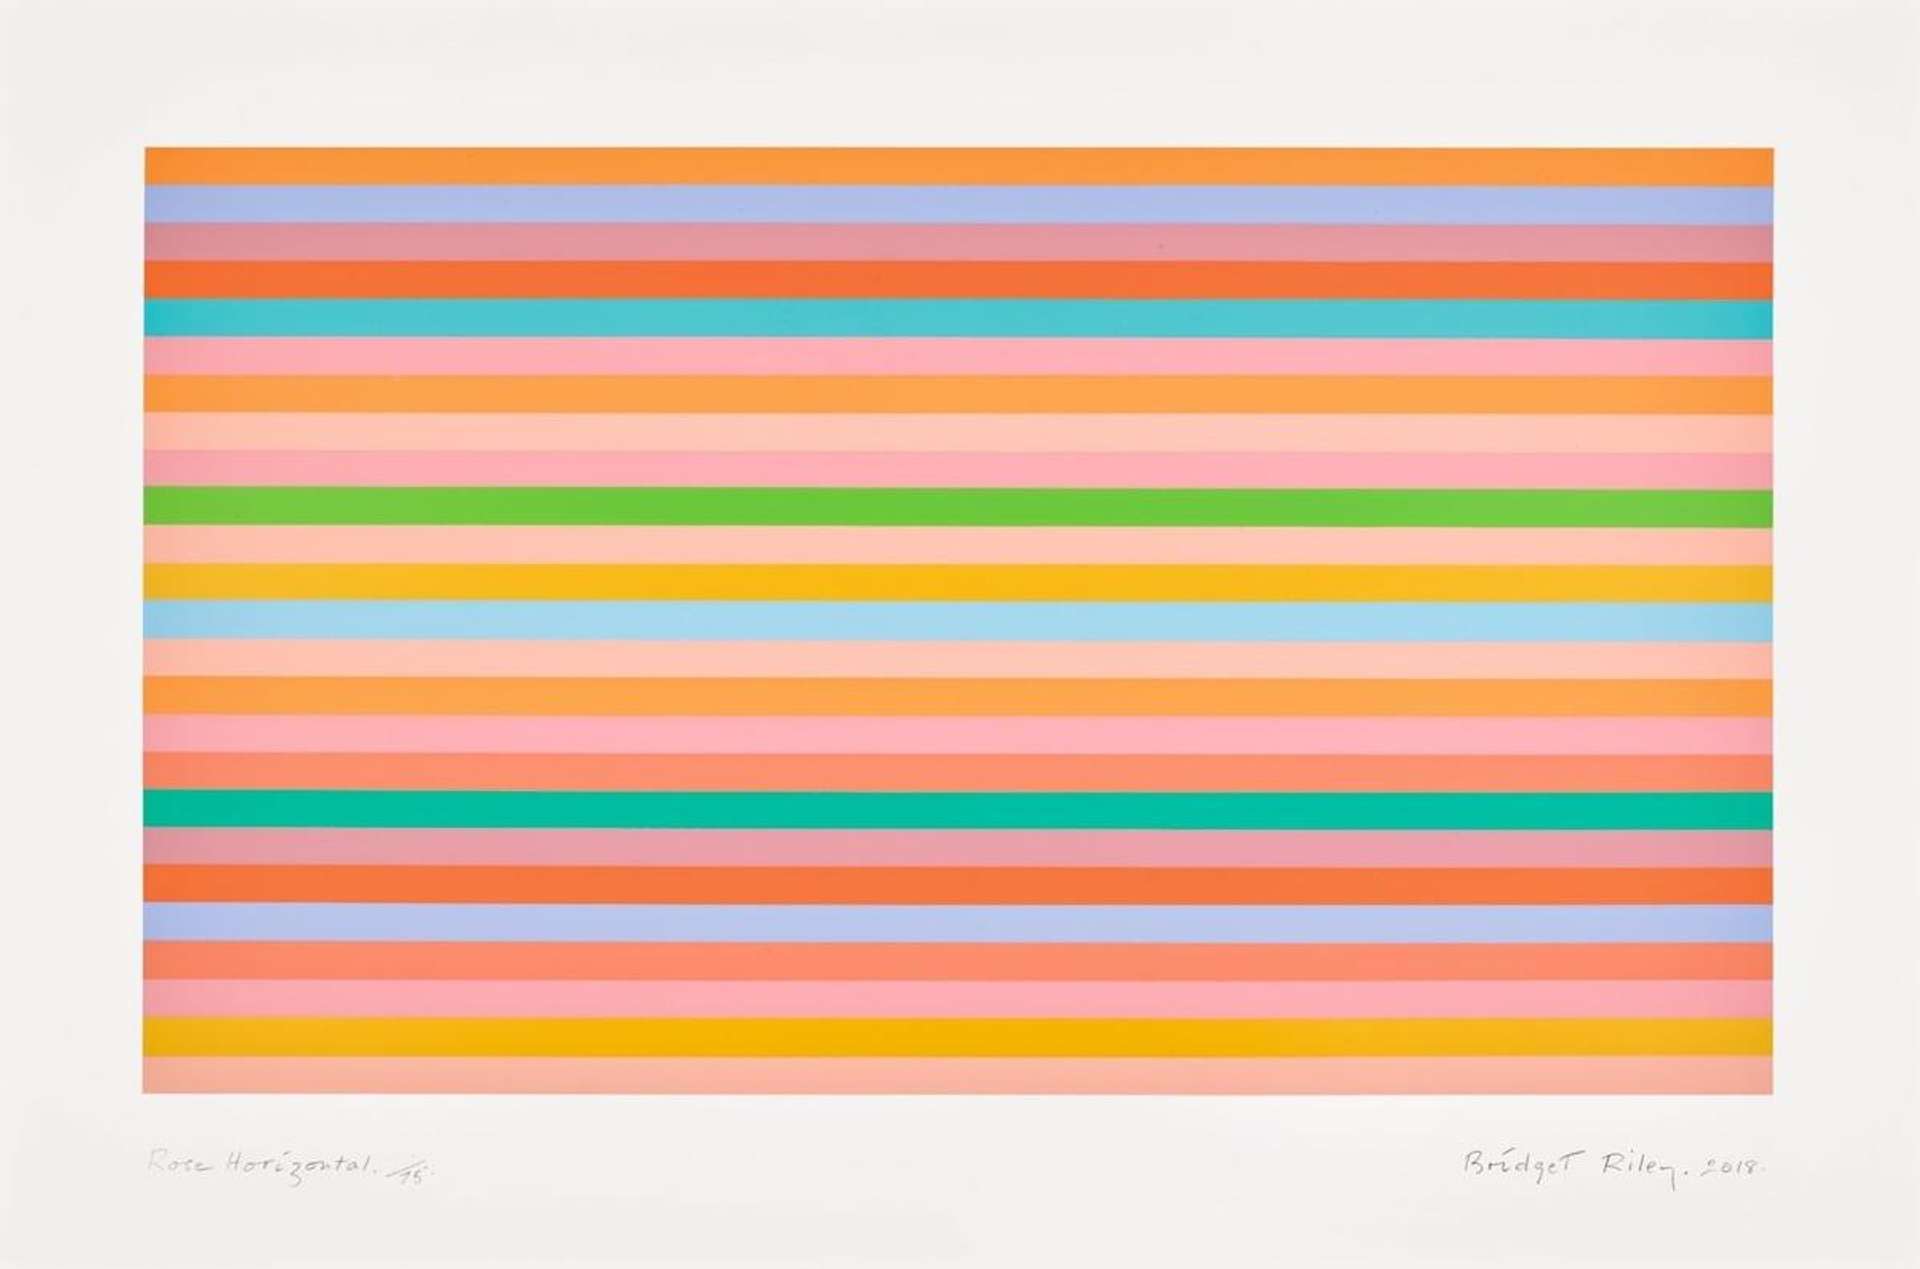 Bridget Riley’s Rose Horizontal. An Op Art screenprint of stacked rows of multicoloured stripes. 